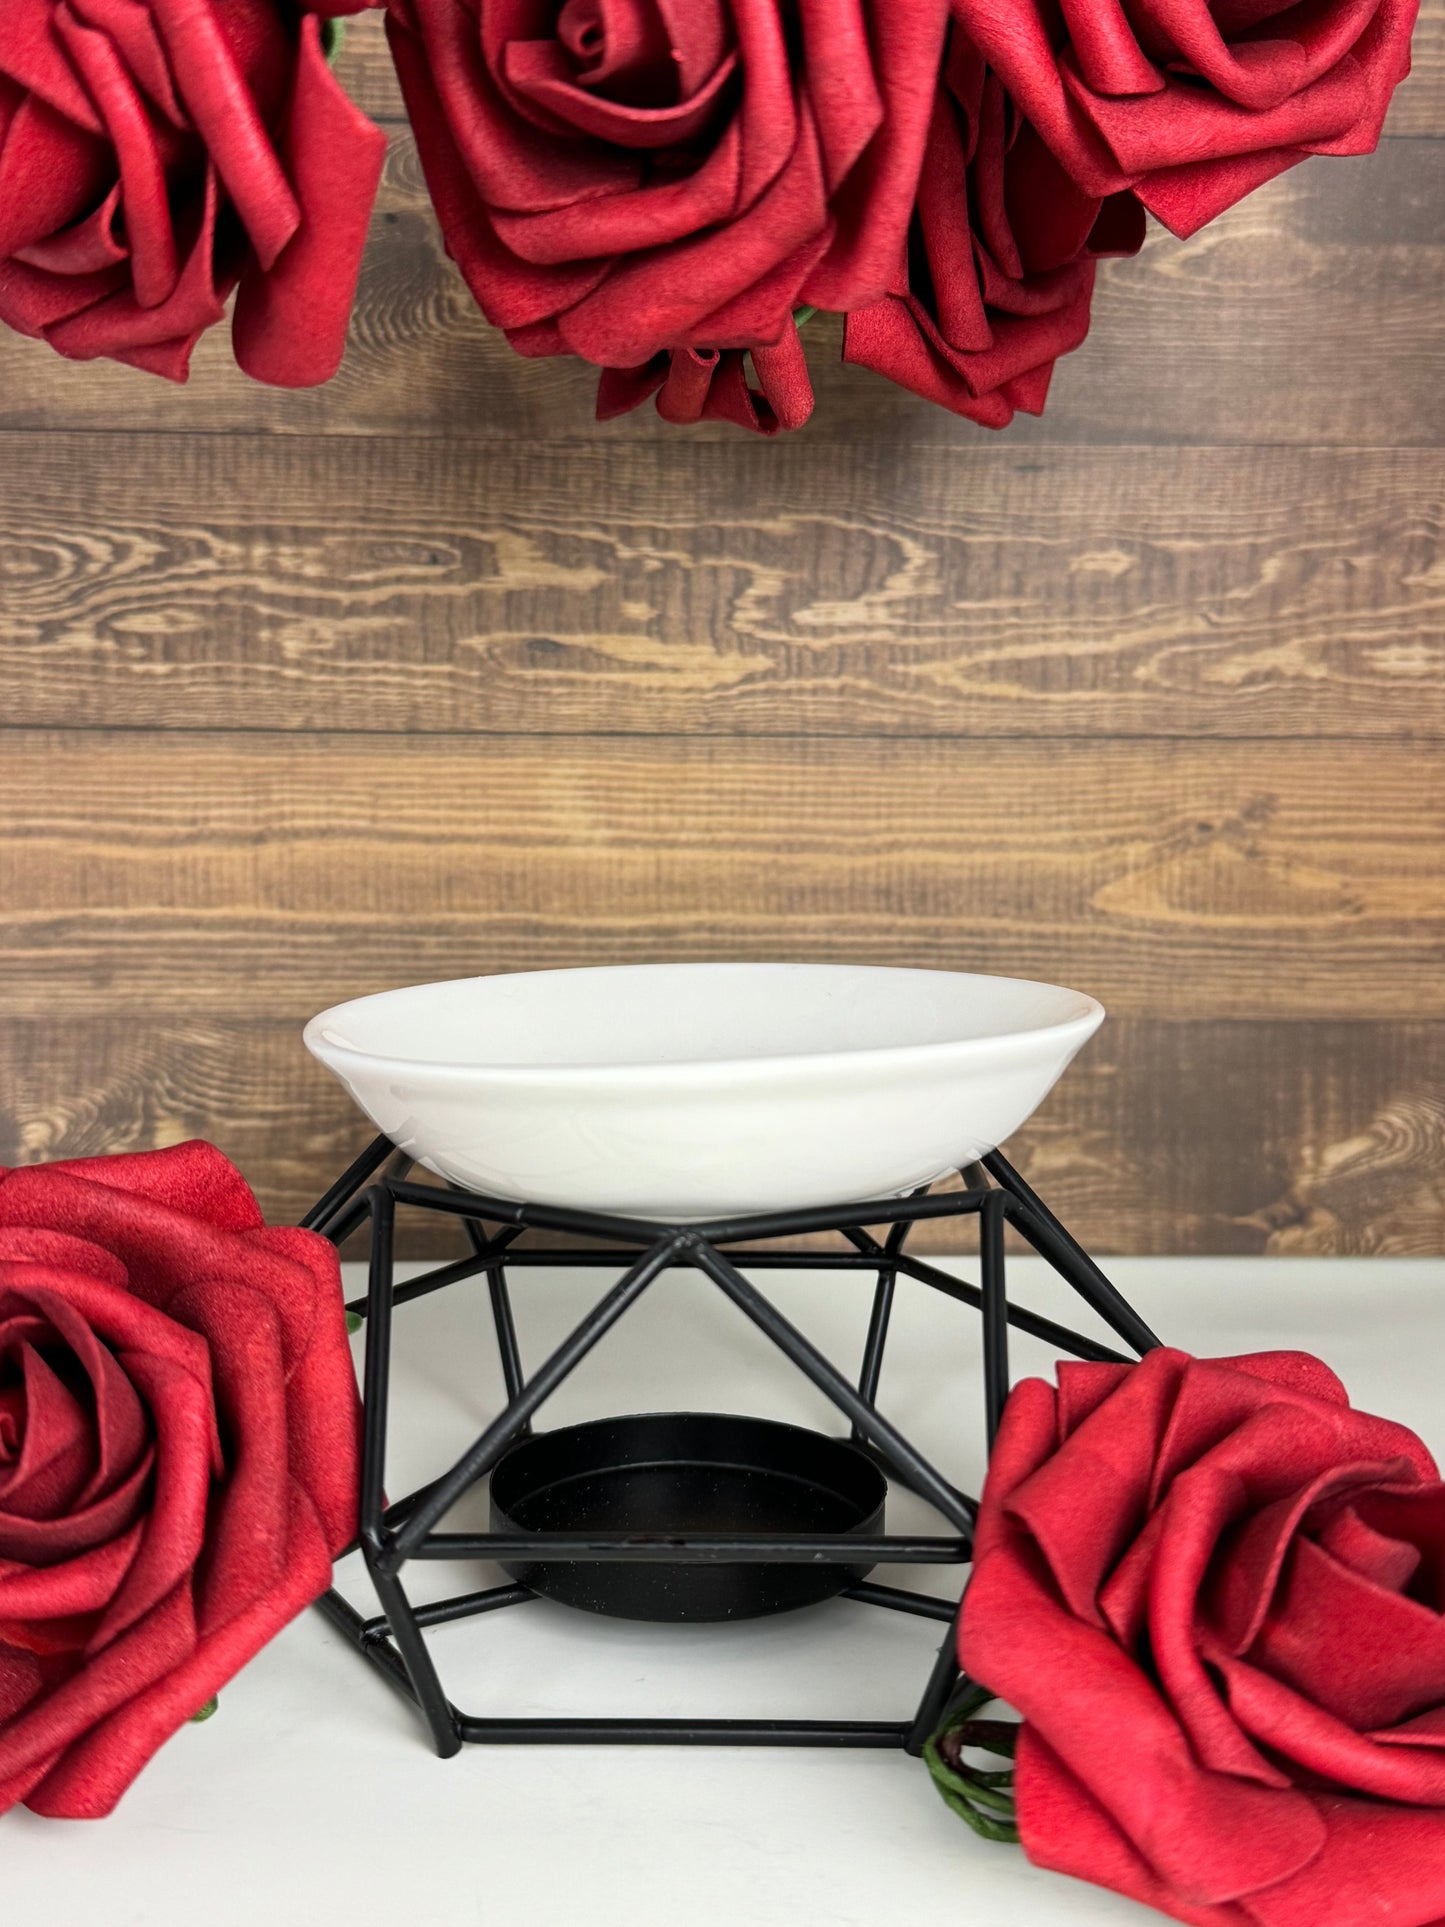 Black Diamond-Shaped | Aromatherapy | Stove | Essential Oil Lamp | Tea light Holder | Wax Melts Warmer | Diffuser for Home Decor